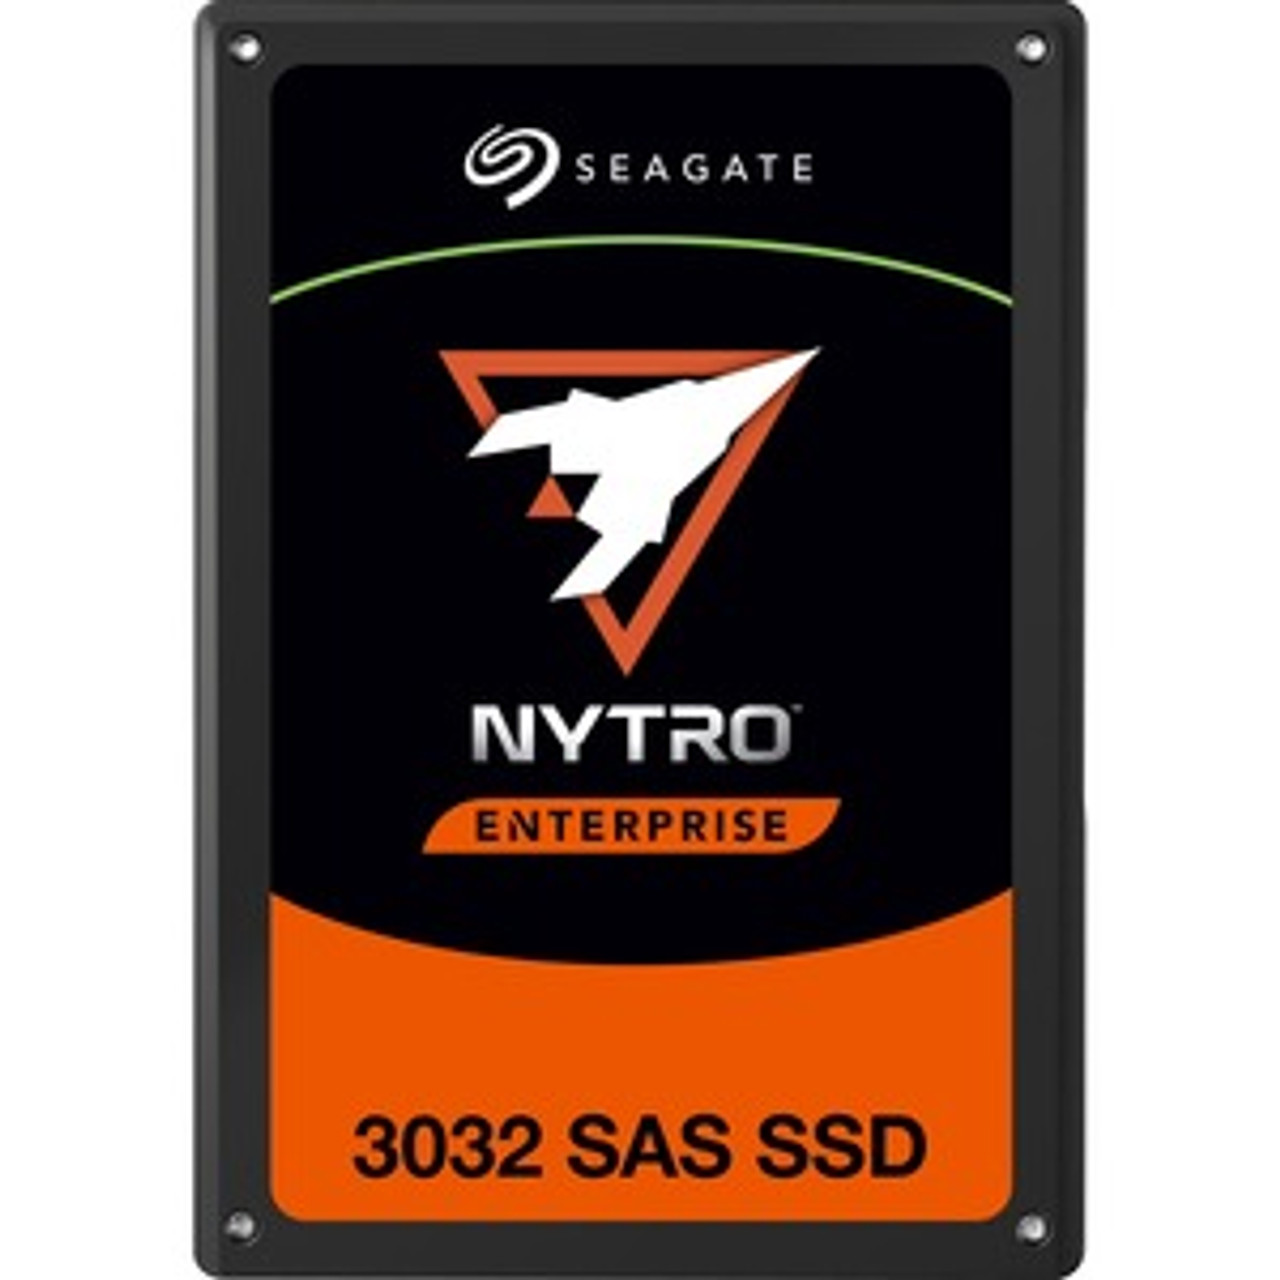 Seagate Nytro 3032 Series 1.92TB eTLC SAS 12Gbps Scaled Endurance 2.5-inch Internal Solid State Drive (SSD) (10-Pack) Mfr P/N XS1920SE70084-10PK